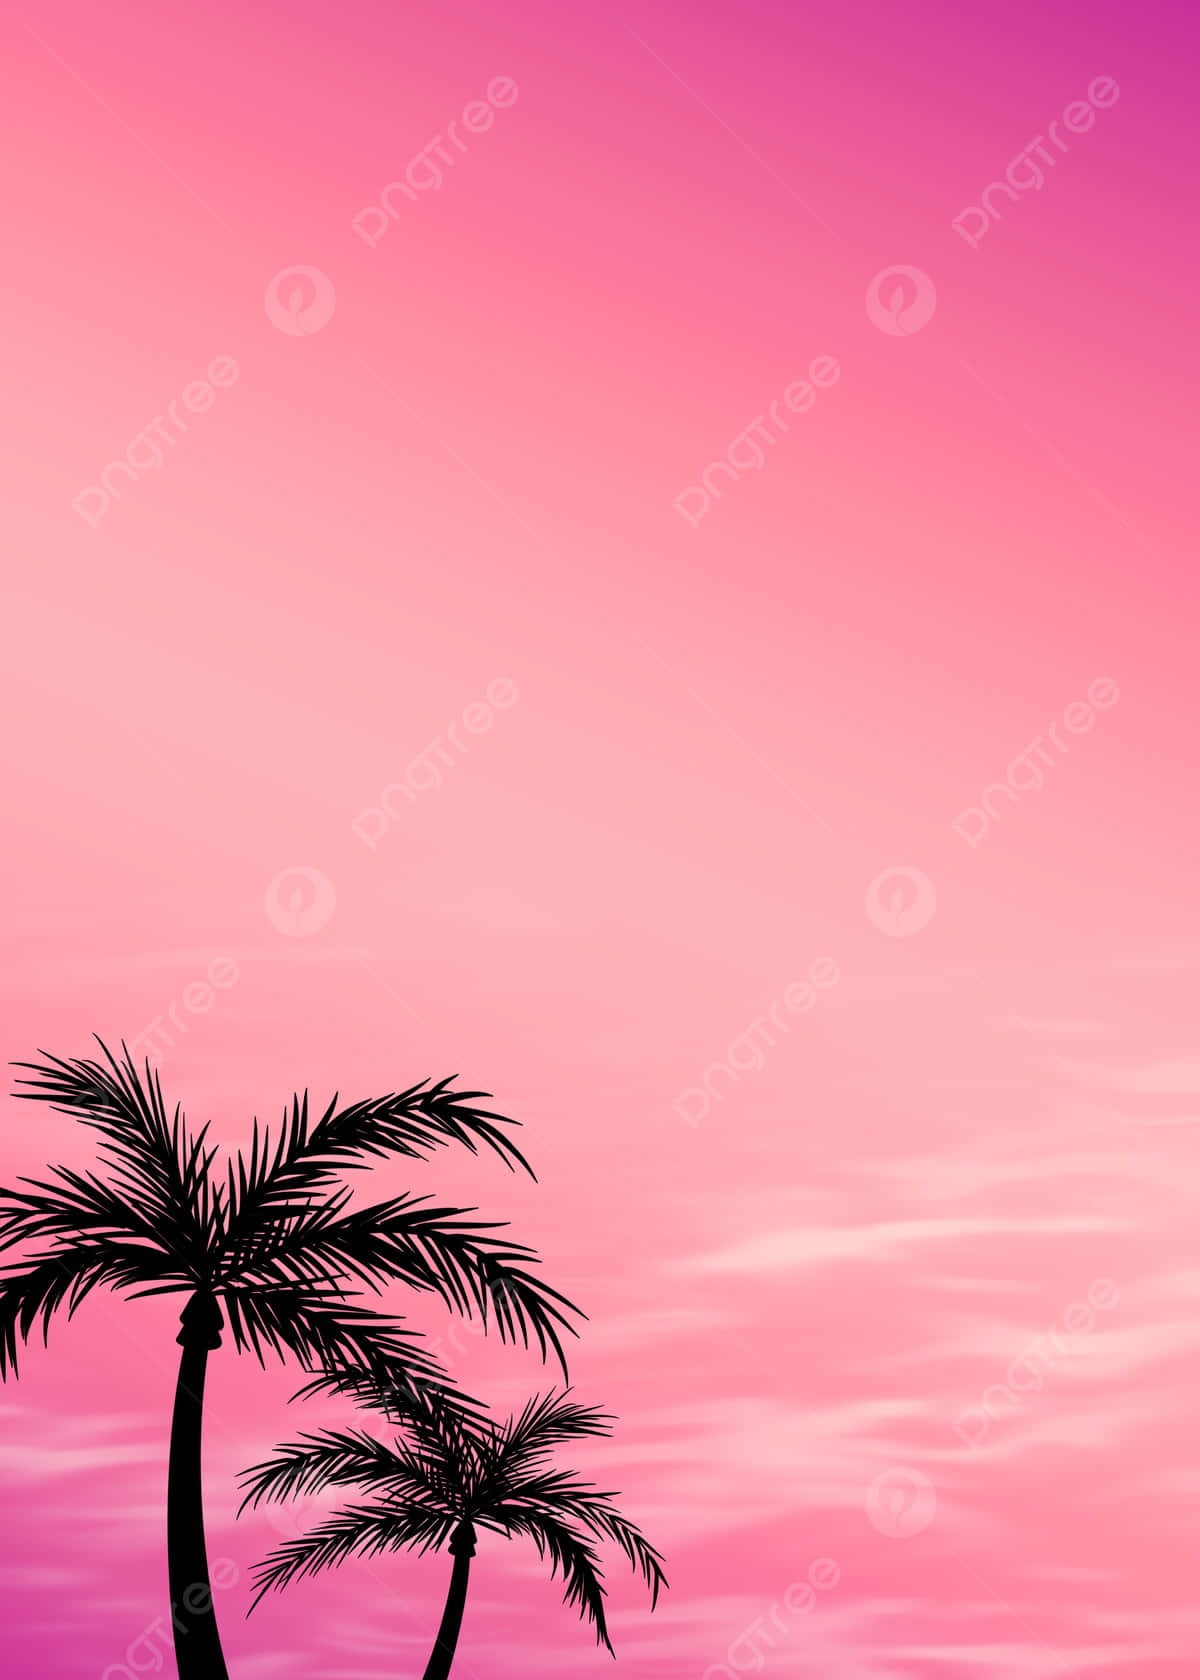 Take in the beauty of a Pink Summer Day Wallpaper